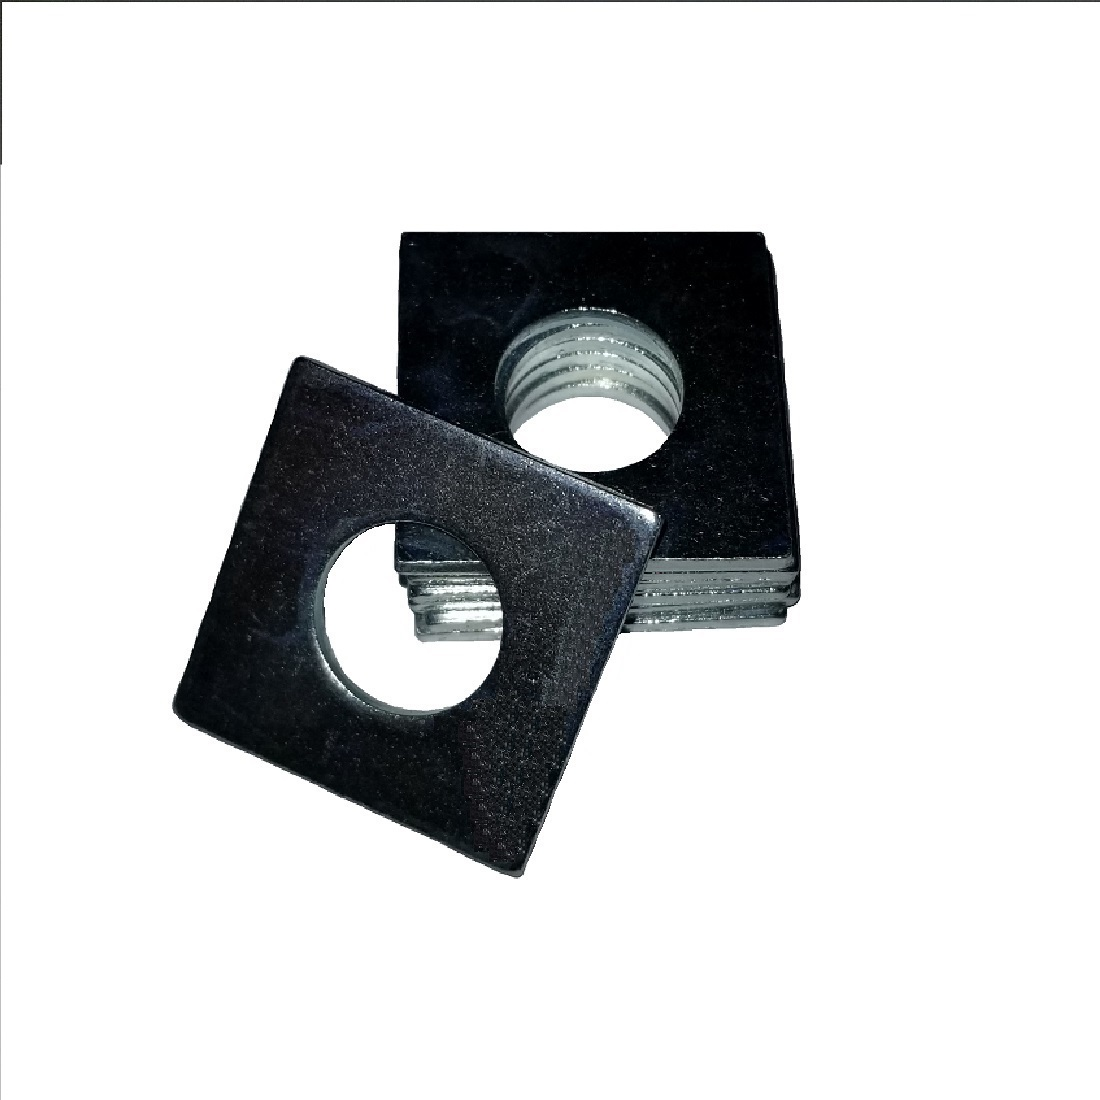 Square OD Washer - 0.170 ID, 0.355 OD, 0.048 Thick, Stainless - 300 Series